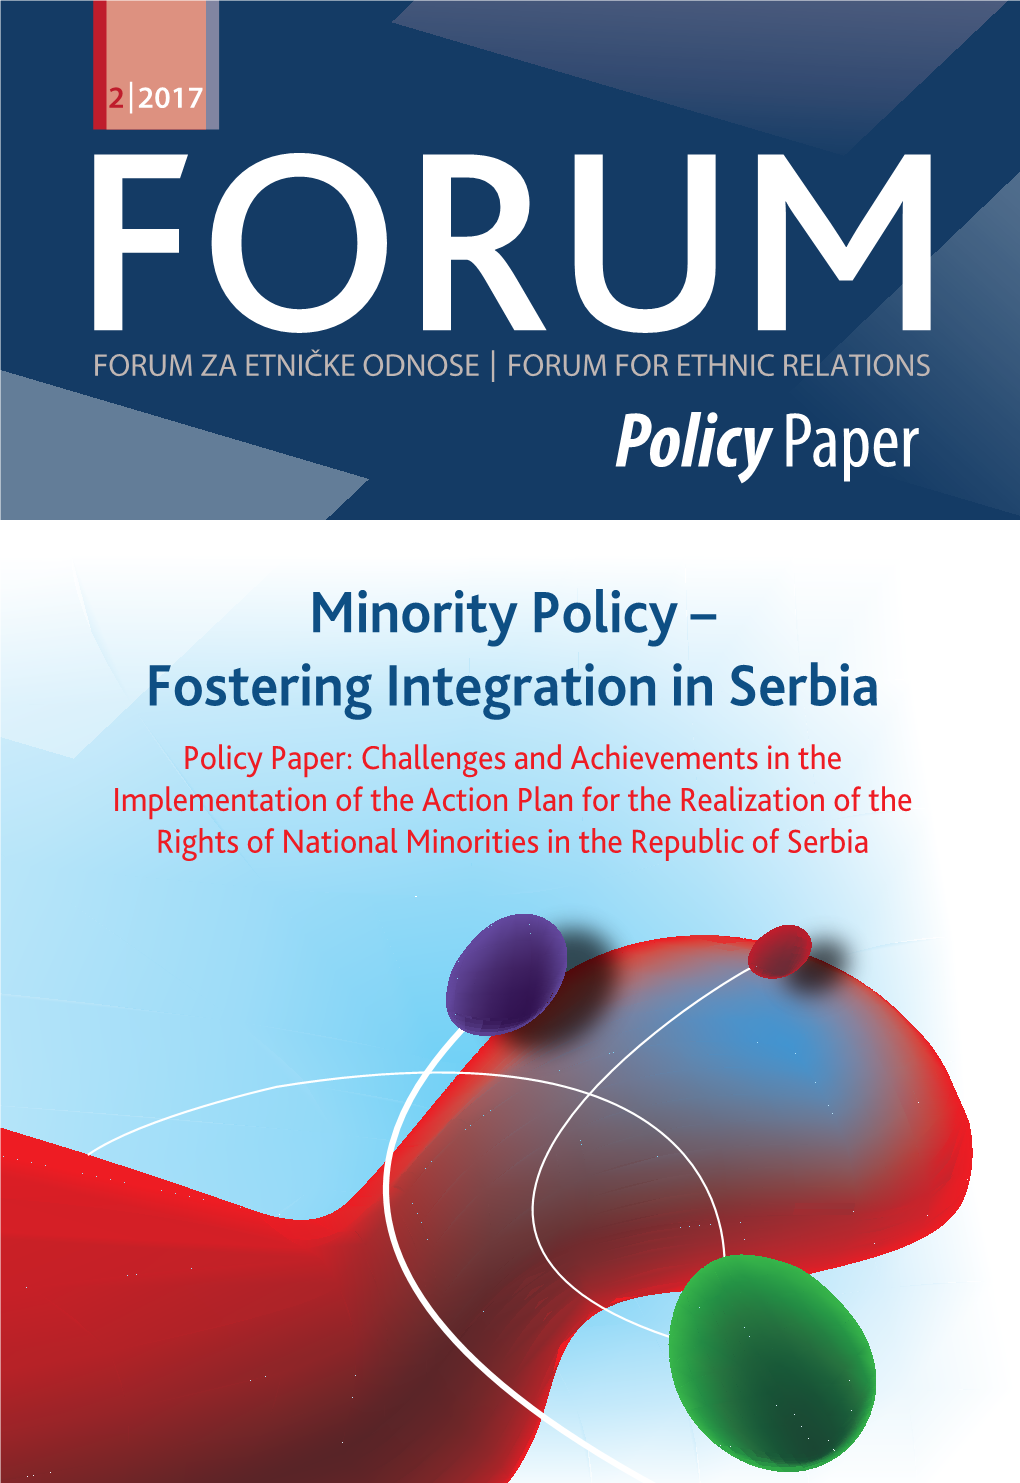 Minority Policy – Fostering Integration in Serbia